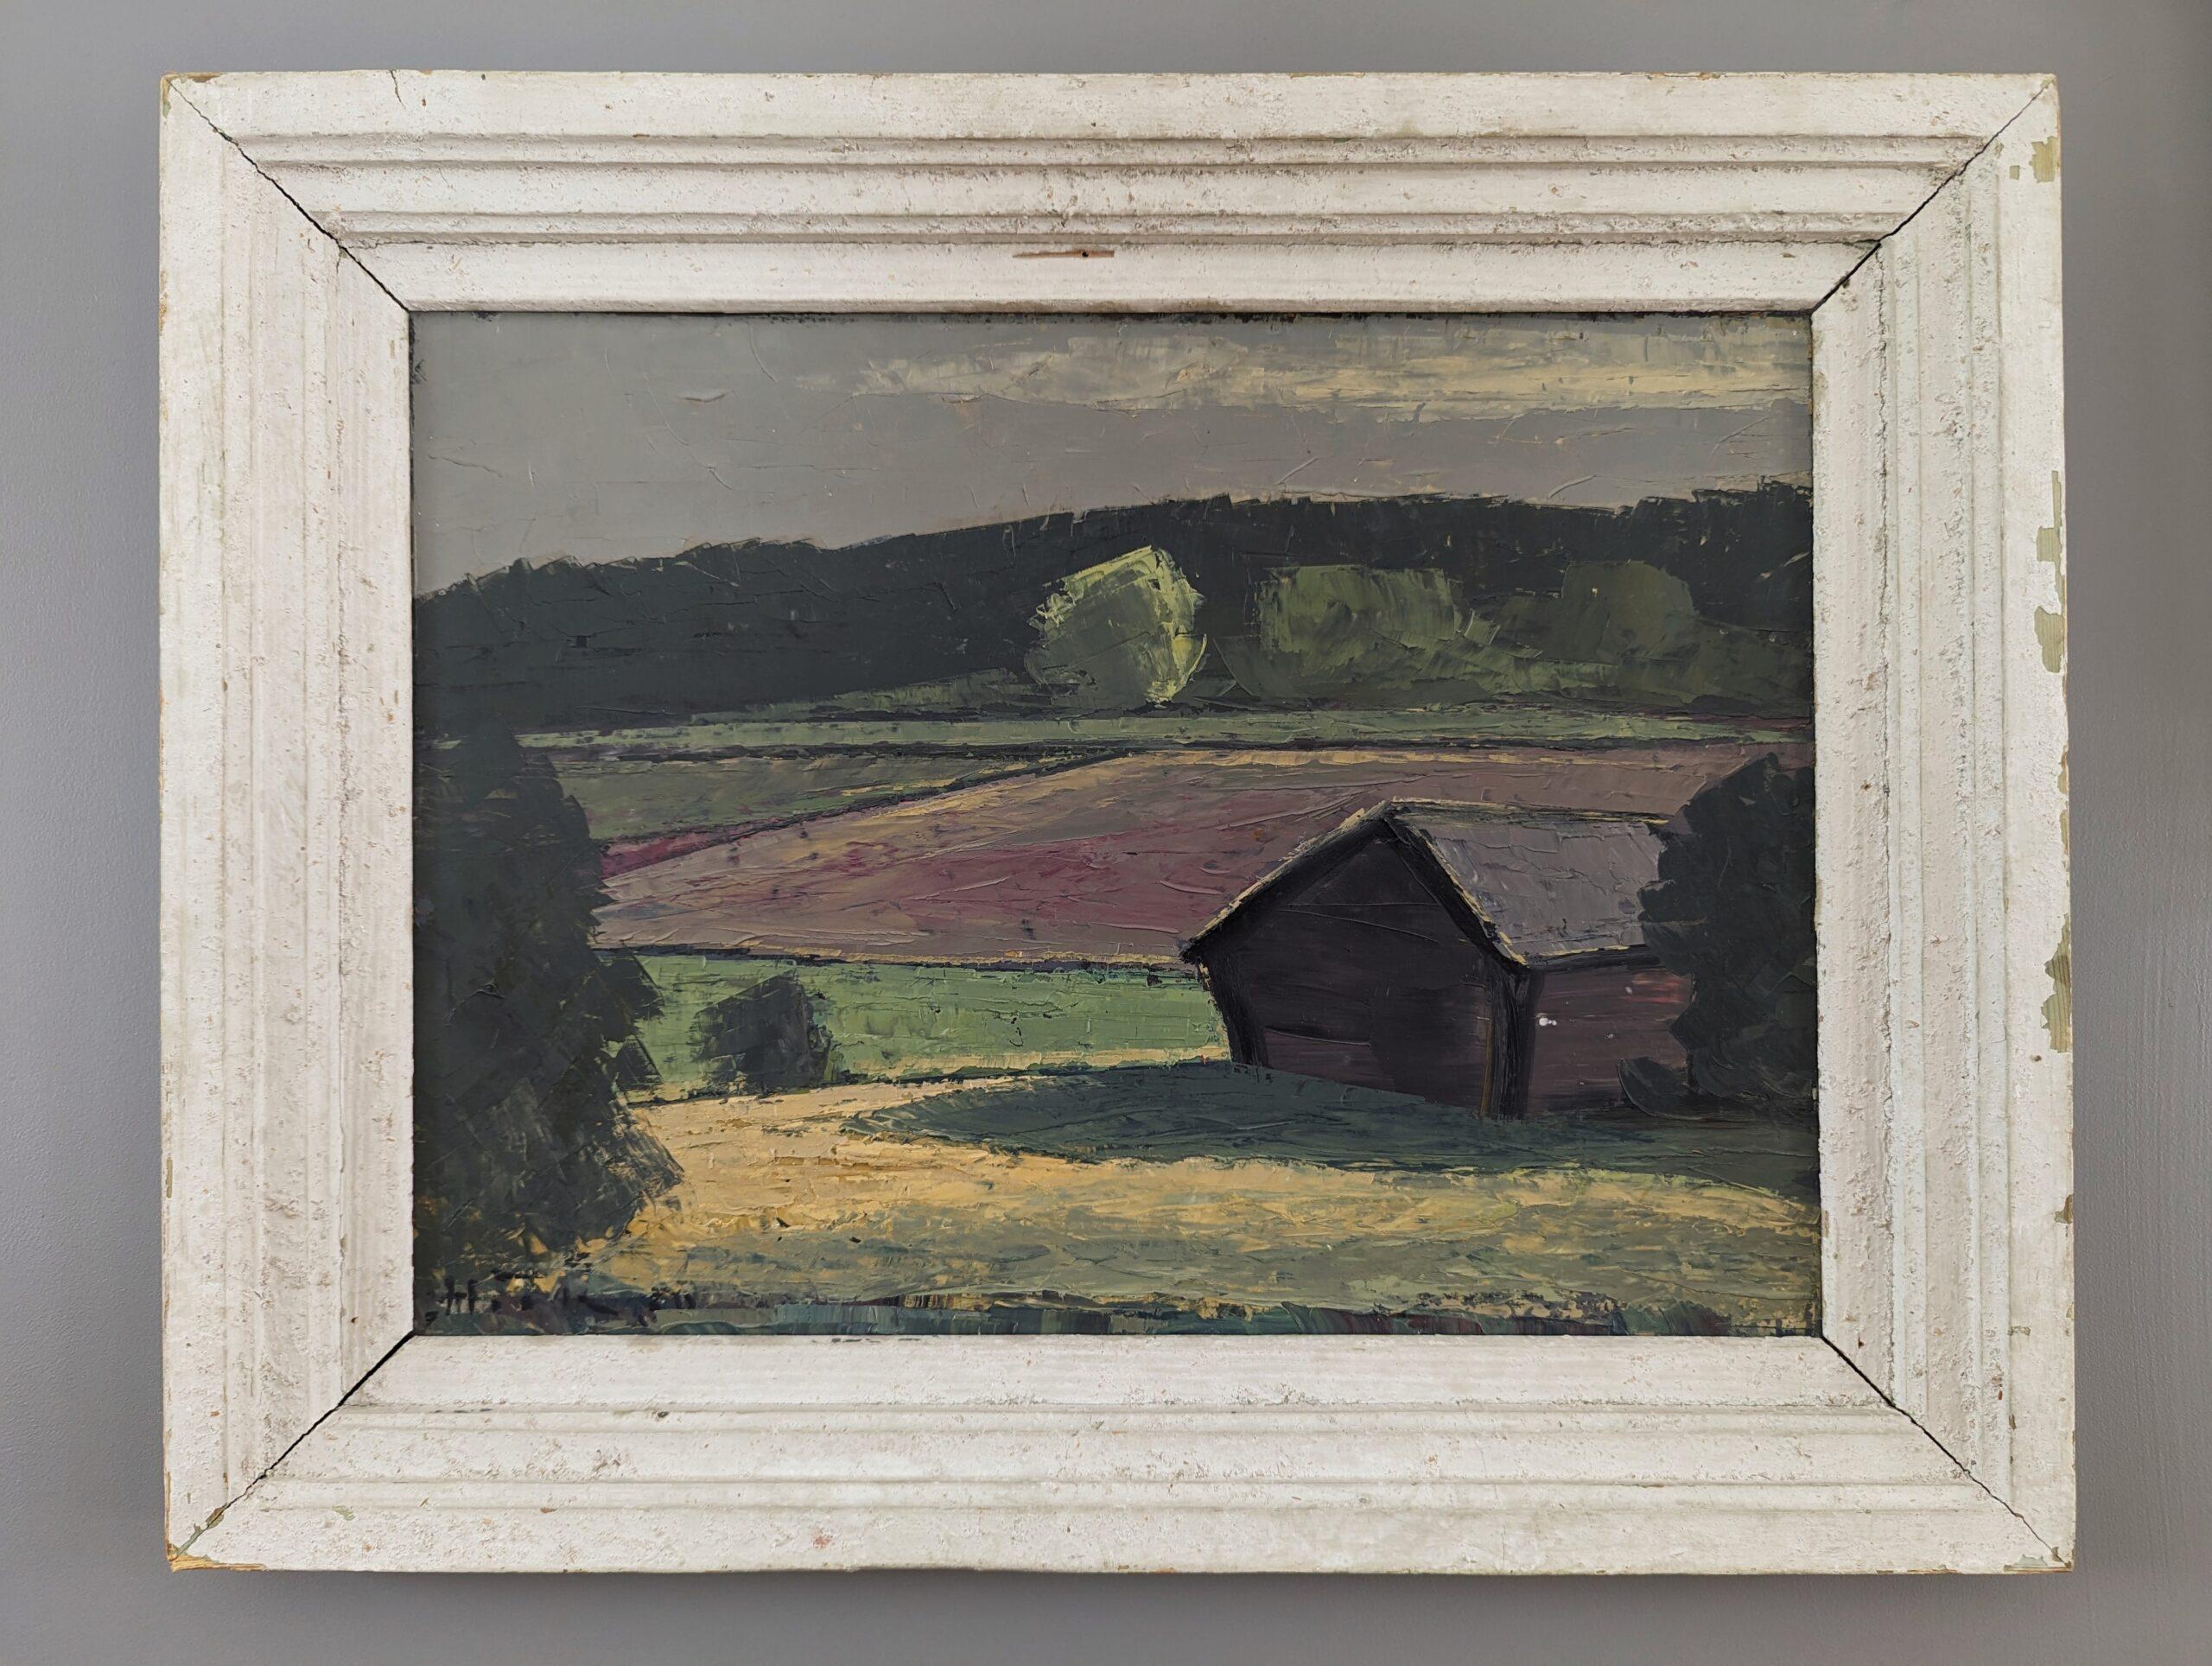 LANDSCAPE LIGHT
Size: 43.5 x 55 cm (including frame)
Oil on Board 

A beautifully textured and soothing mid-century landscape composition, executed in oil onto board and dated 1950.

This panoramic landscape painting presents a view of a meadow barn